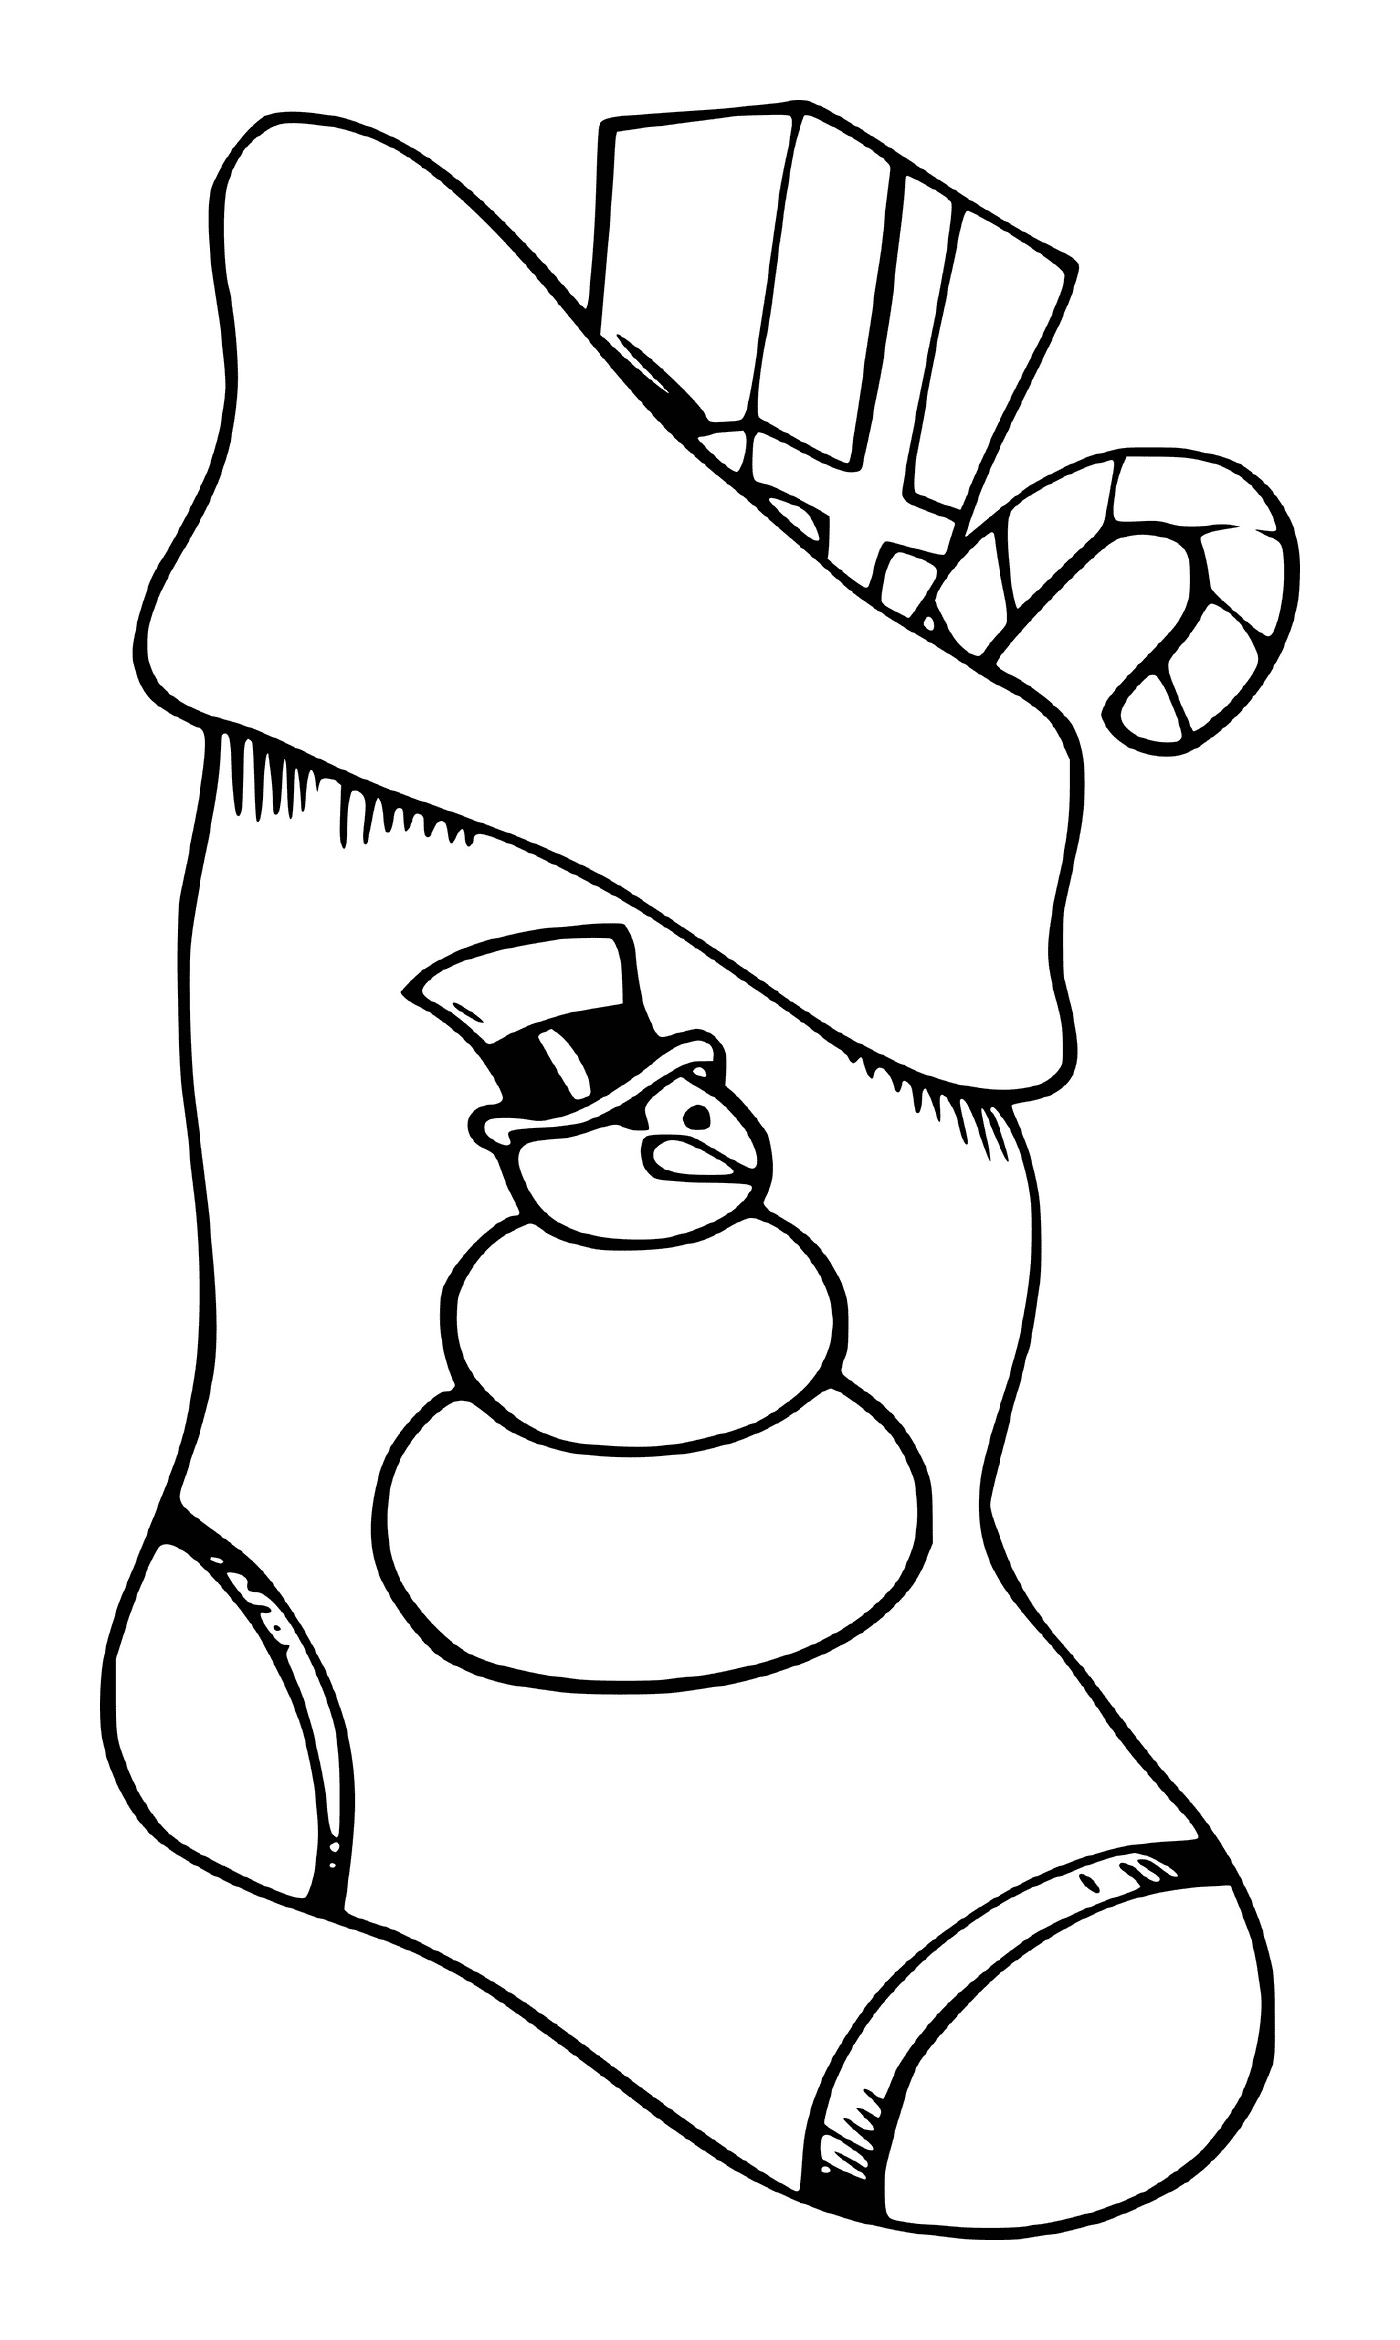  Christmas stockings with a snowman 